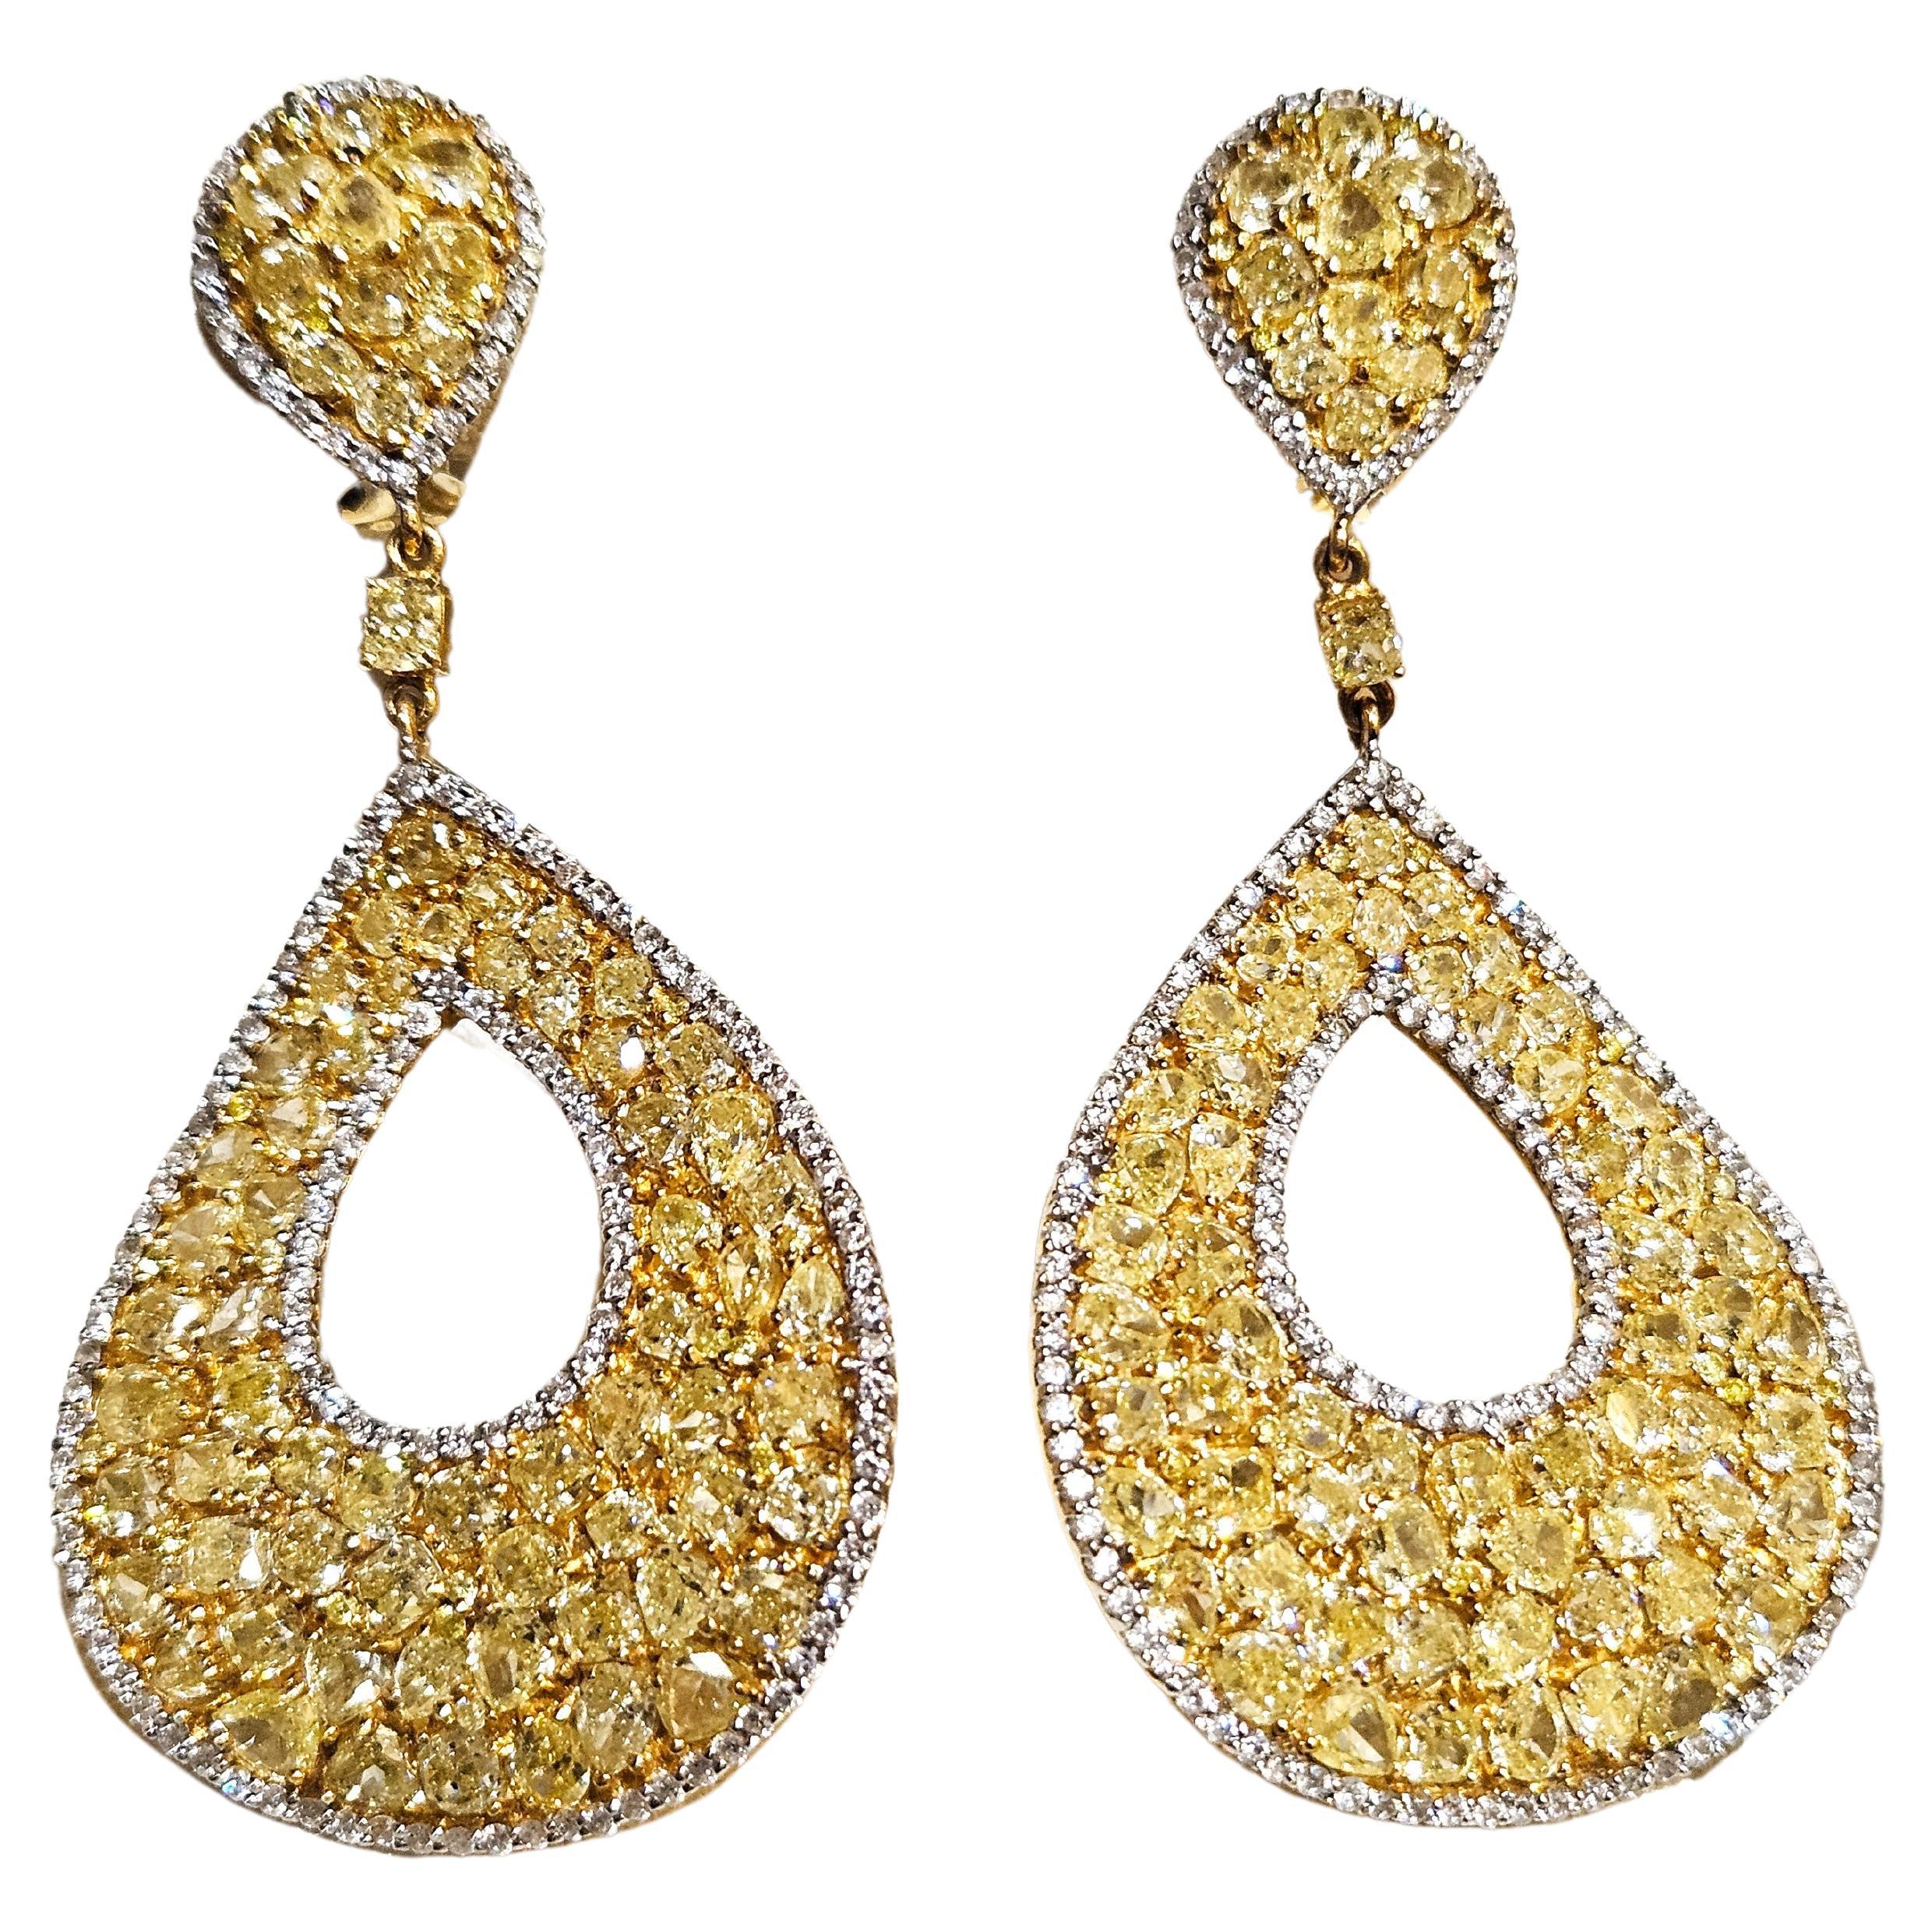 NWT $85, 000 Magnificent Fancy Rose Cut Yellow Diamond Dangle Gold Earrings